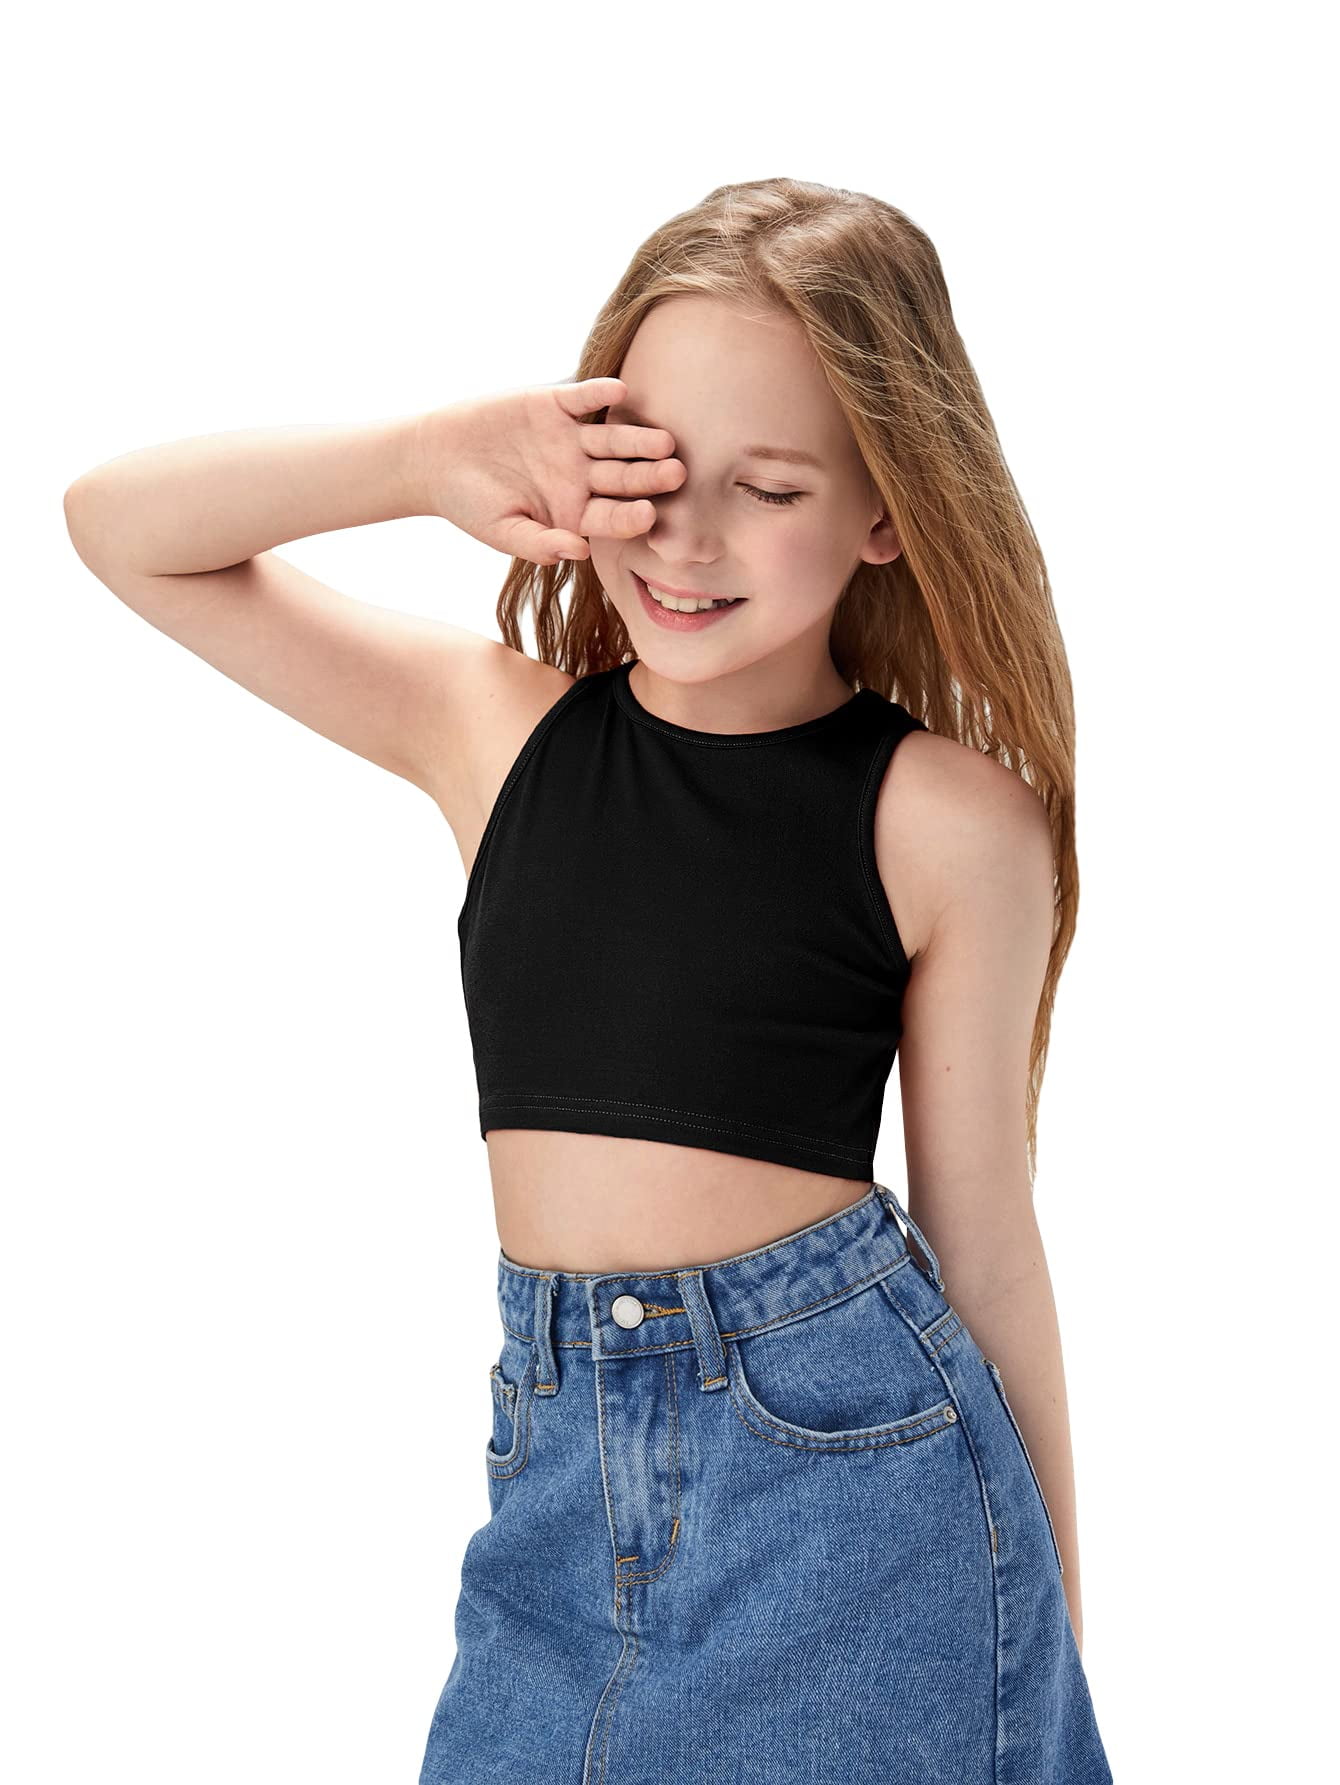 SOLY HUX Girl's Sleeveless Round Casual Baisc Crop Tank Tops Solid Black - Walmart.com